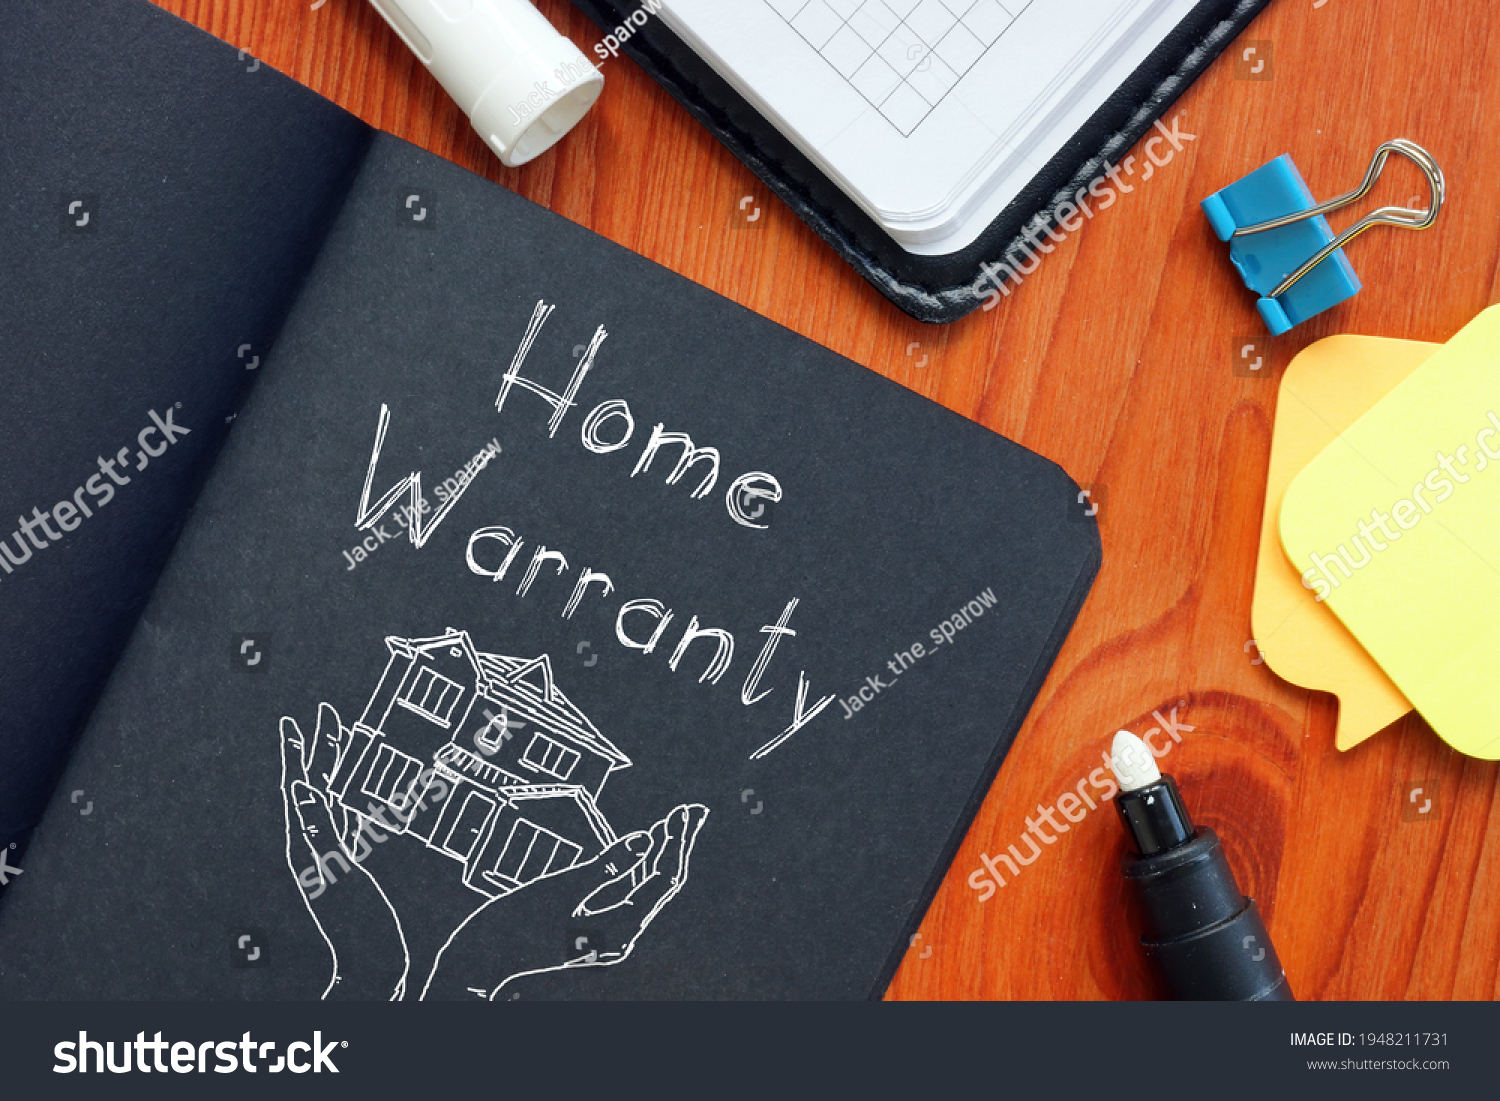 Home Warranty is shown on the photo using the text #1948211731